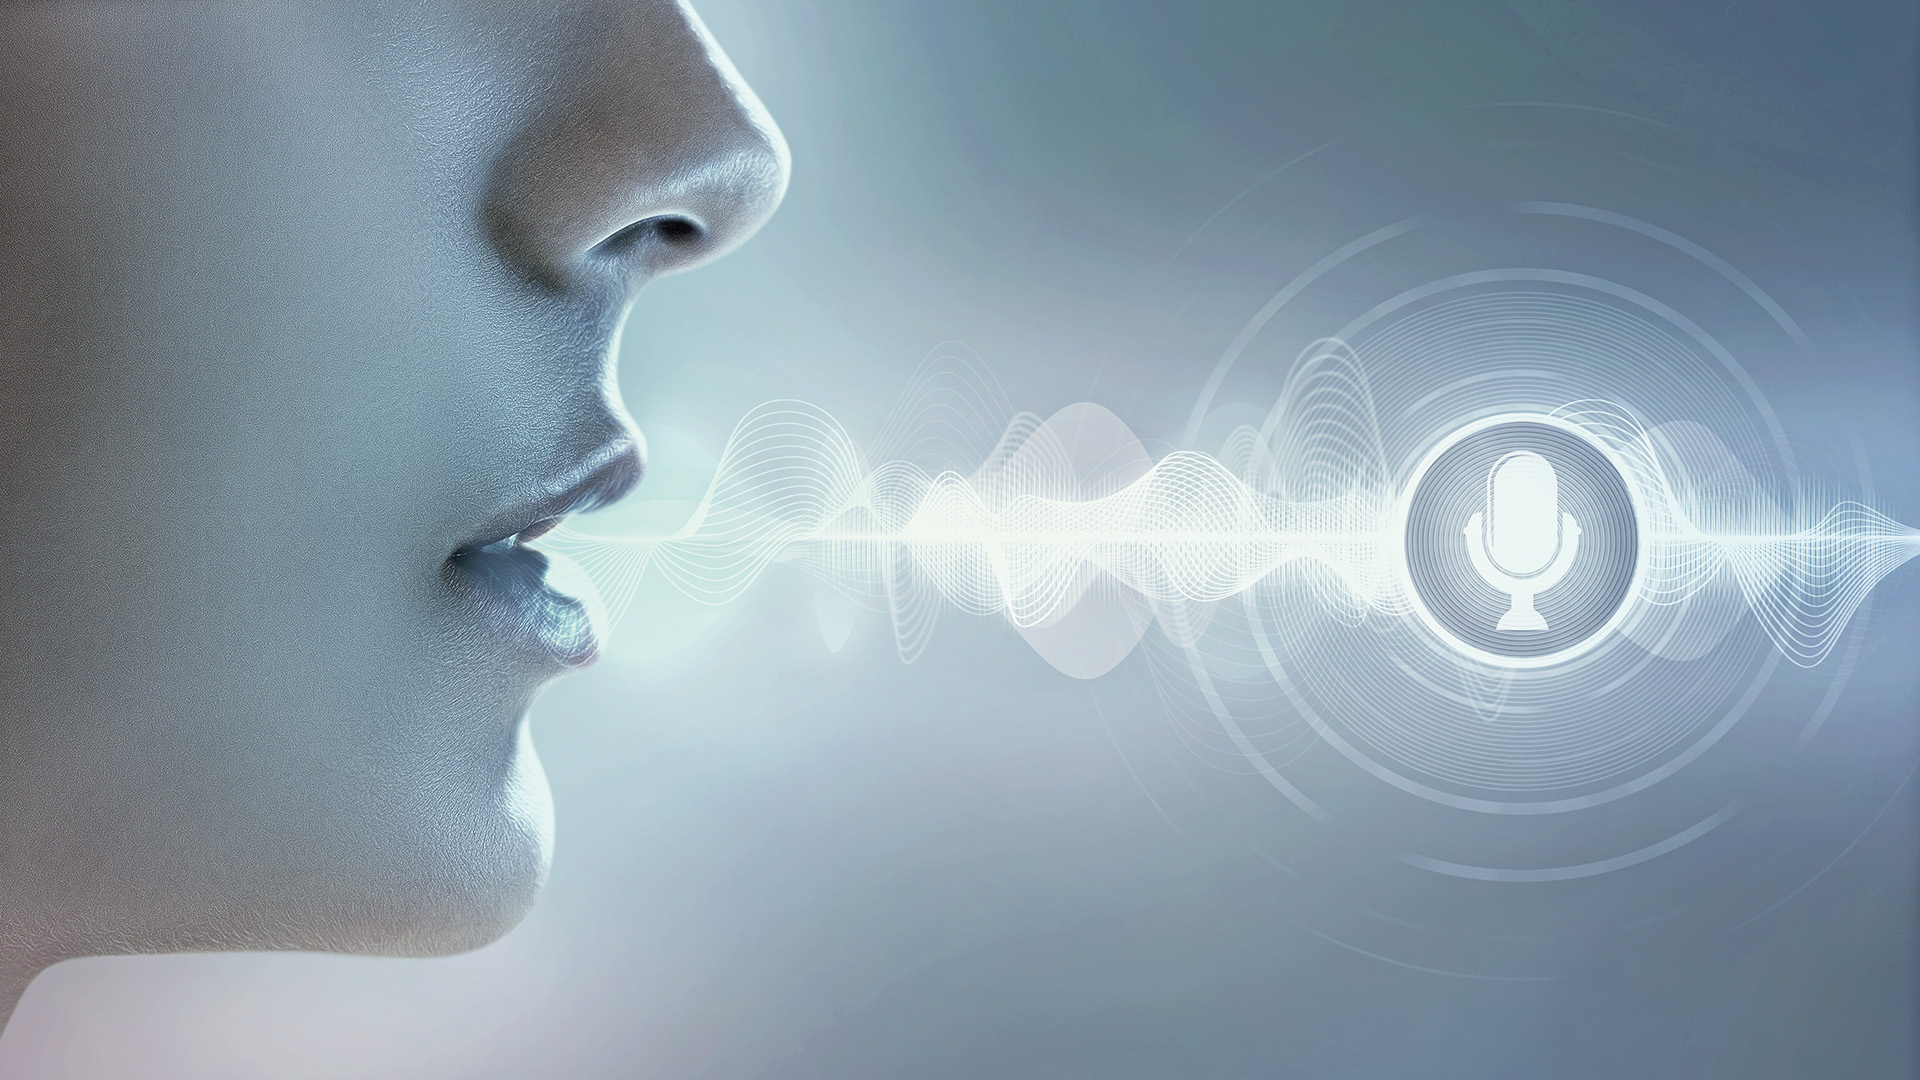 VIER enables real-time biometric voice authentication on the phone